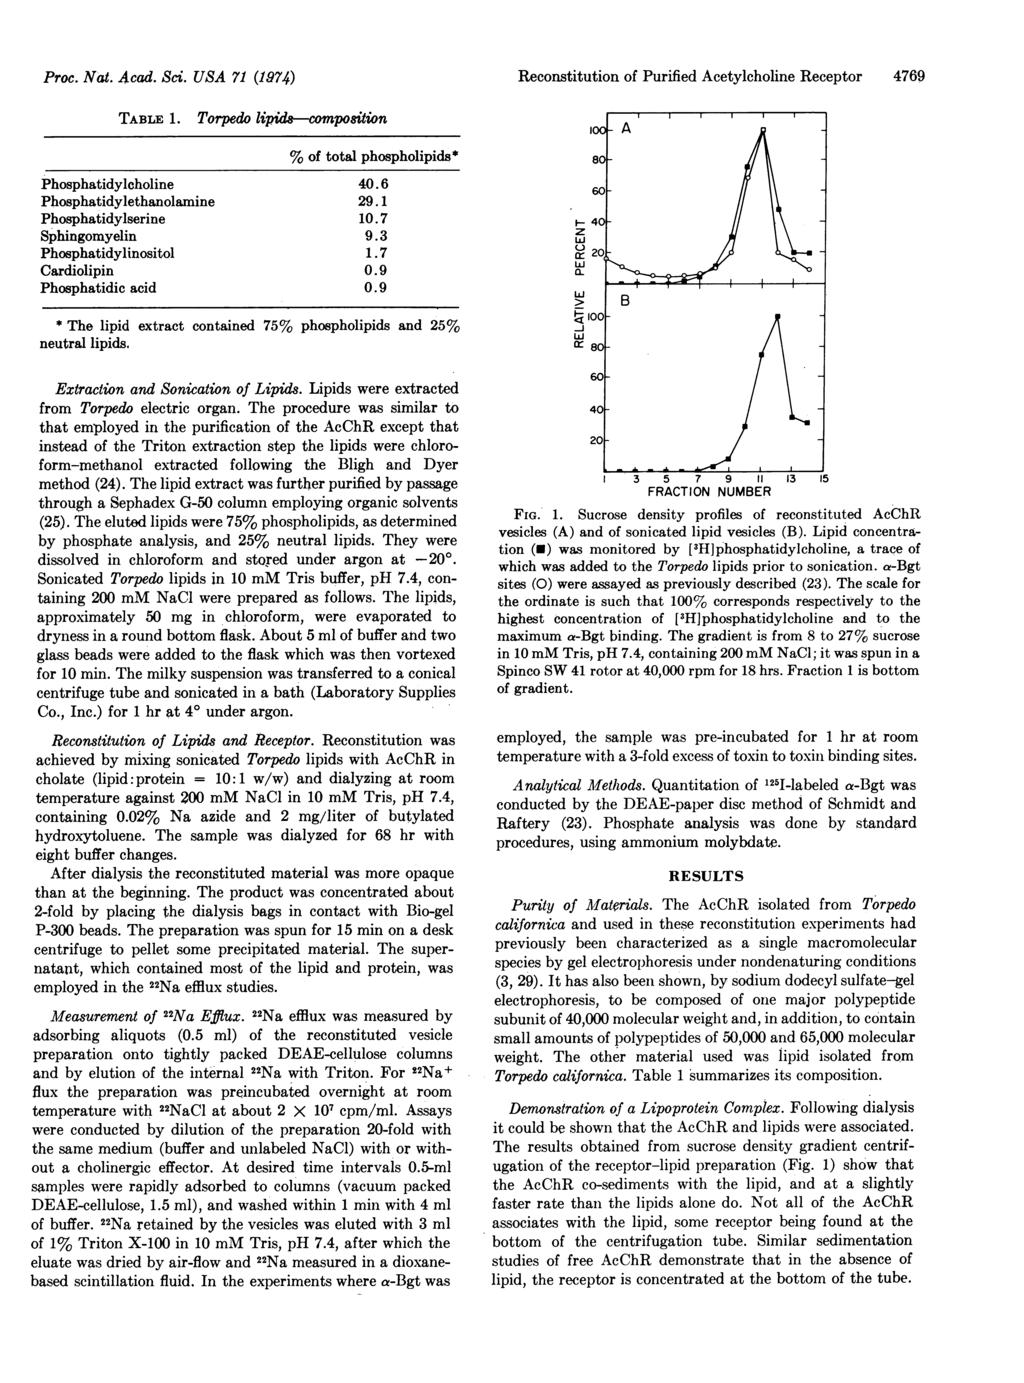 Proc. NW. -4cad. Sci. USA 71 (1974) Reconstitution of Purified Acetylcholine Receptor 4769 TABLE 1. Torpedo lipids-composition % of total phospholipids* Phosphatidylcholine 4.